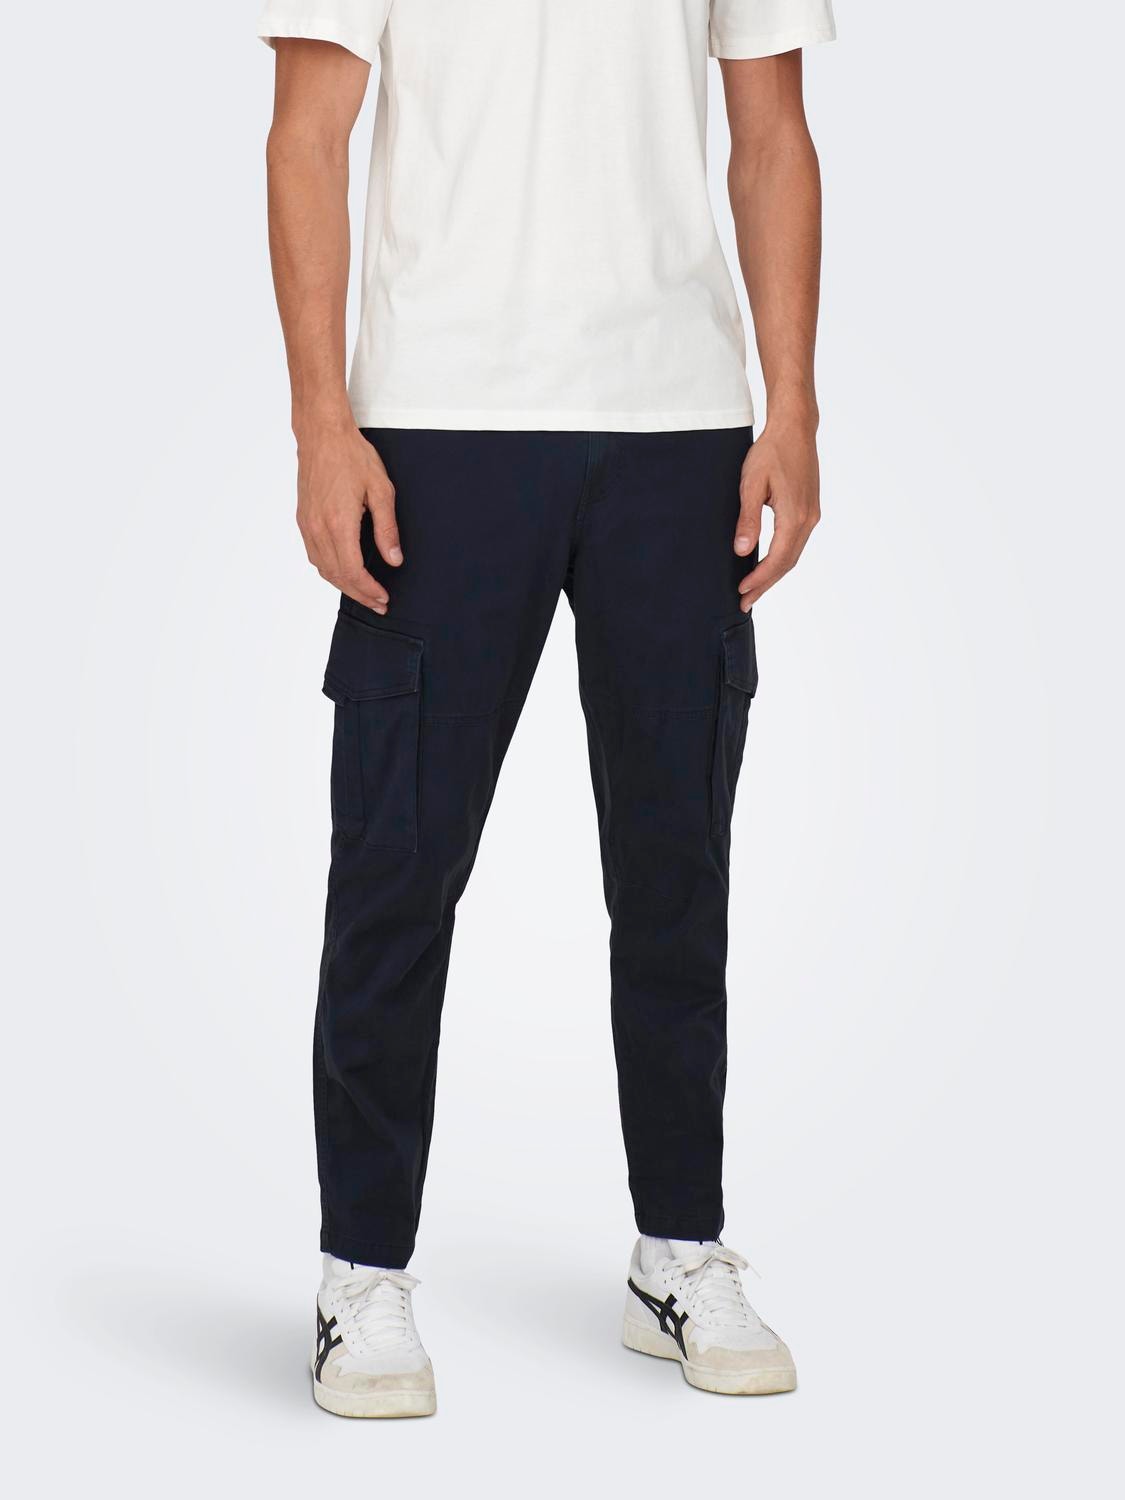 ONLY & SONS Tapered Fit Trousers -Navy Blazer - 22025431